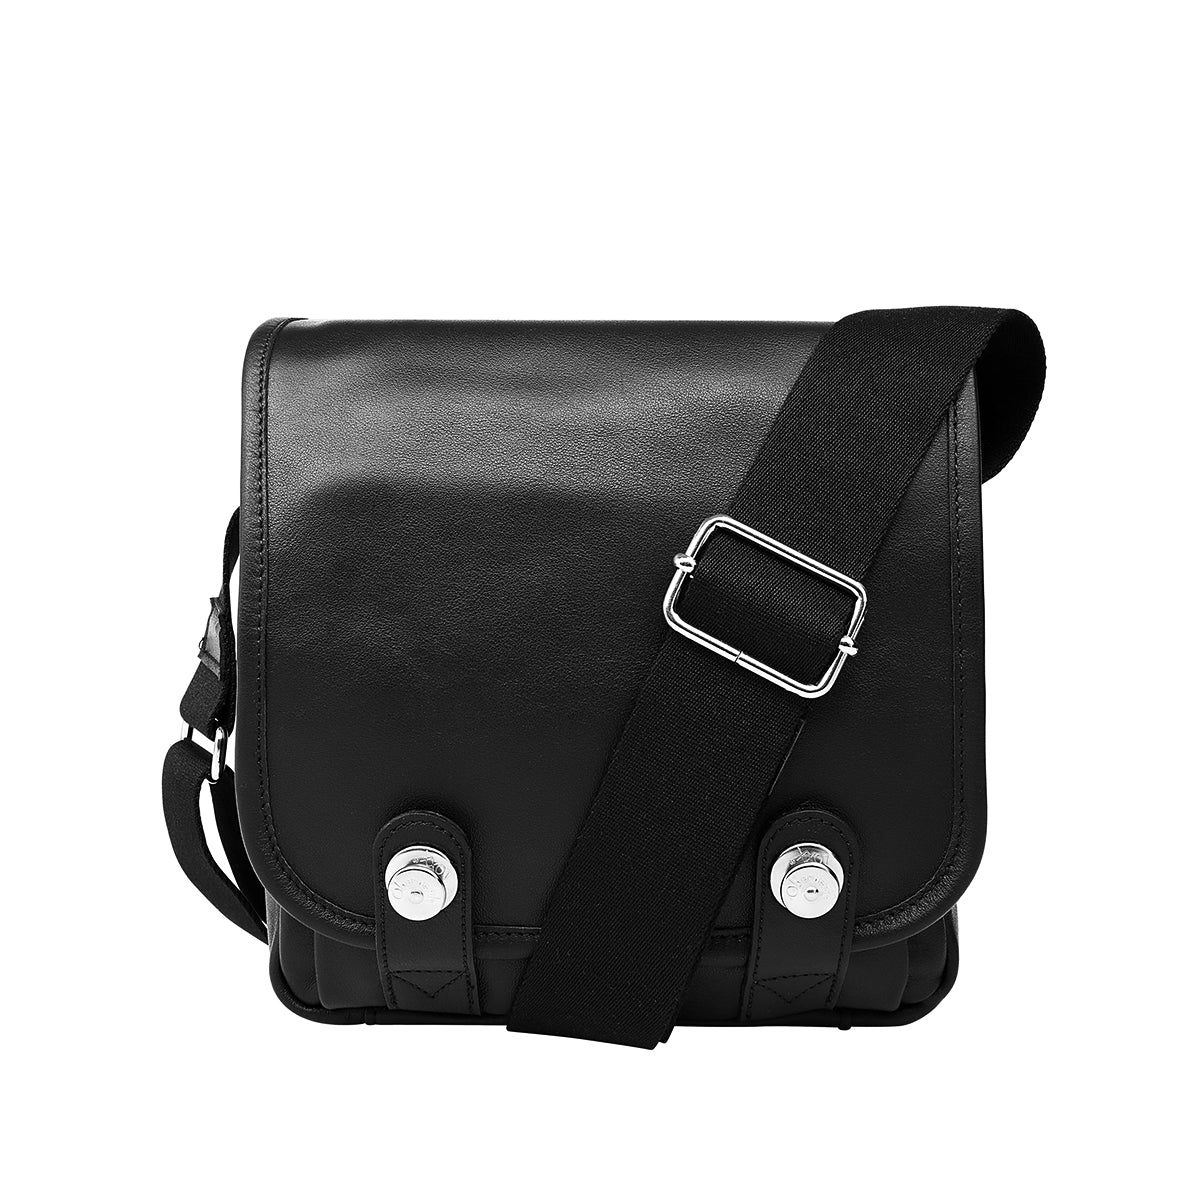 Oberwerth Boulevard Compact - Leather Camera Bag, Black with Red Lining